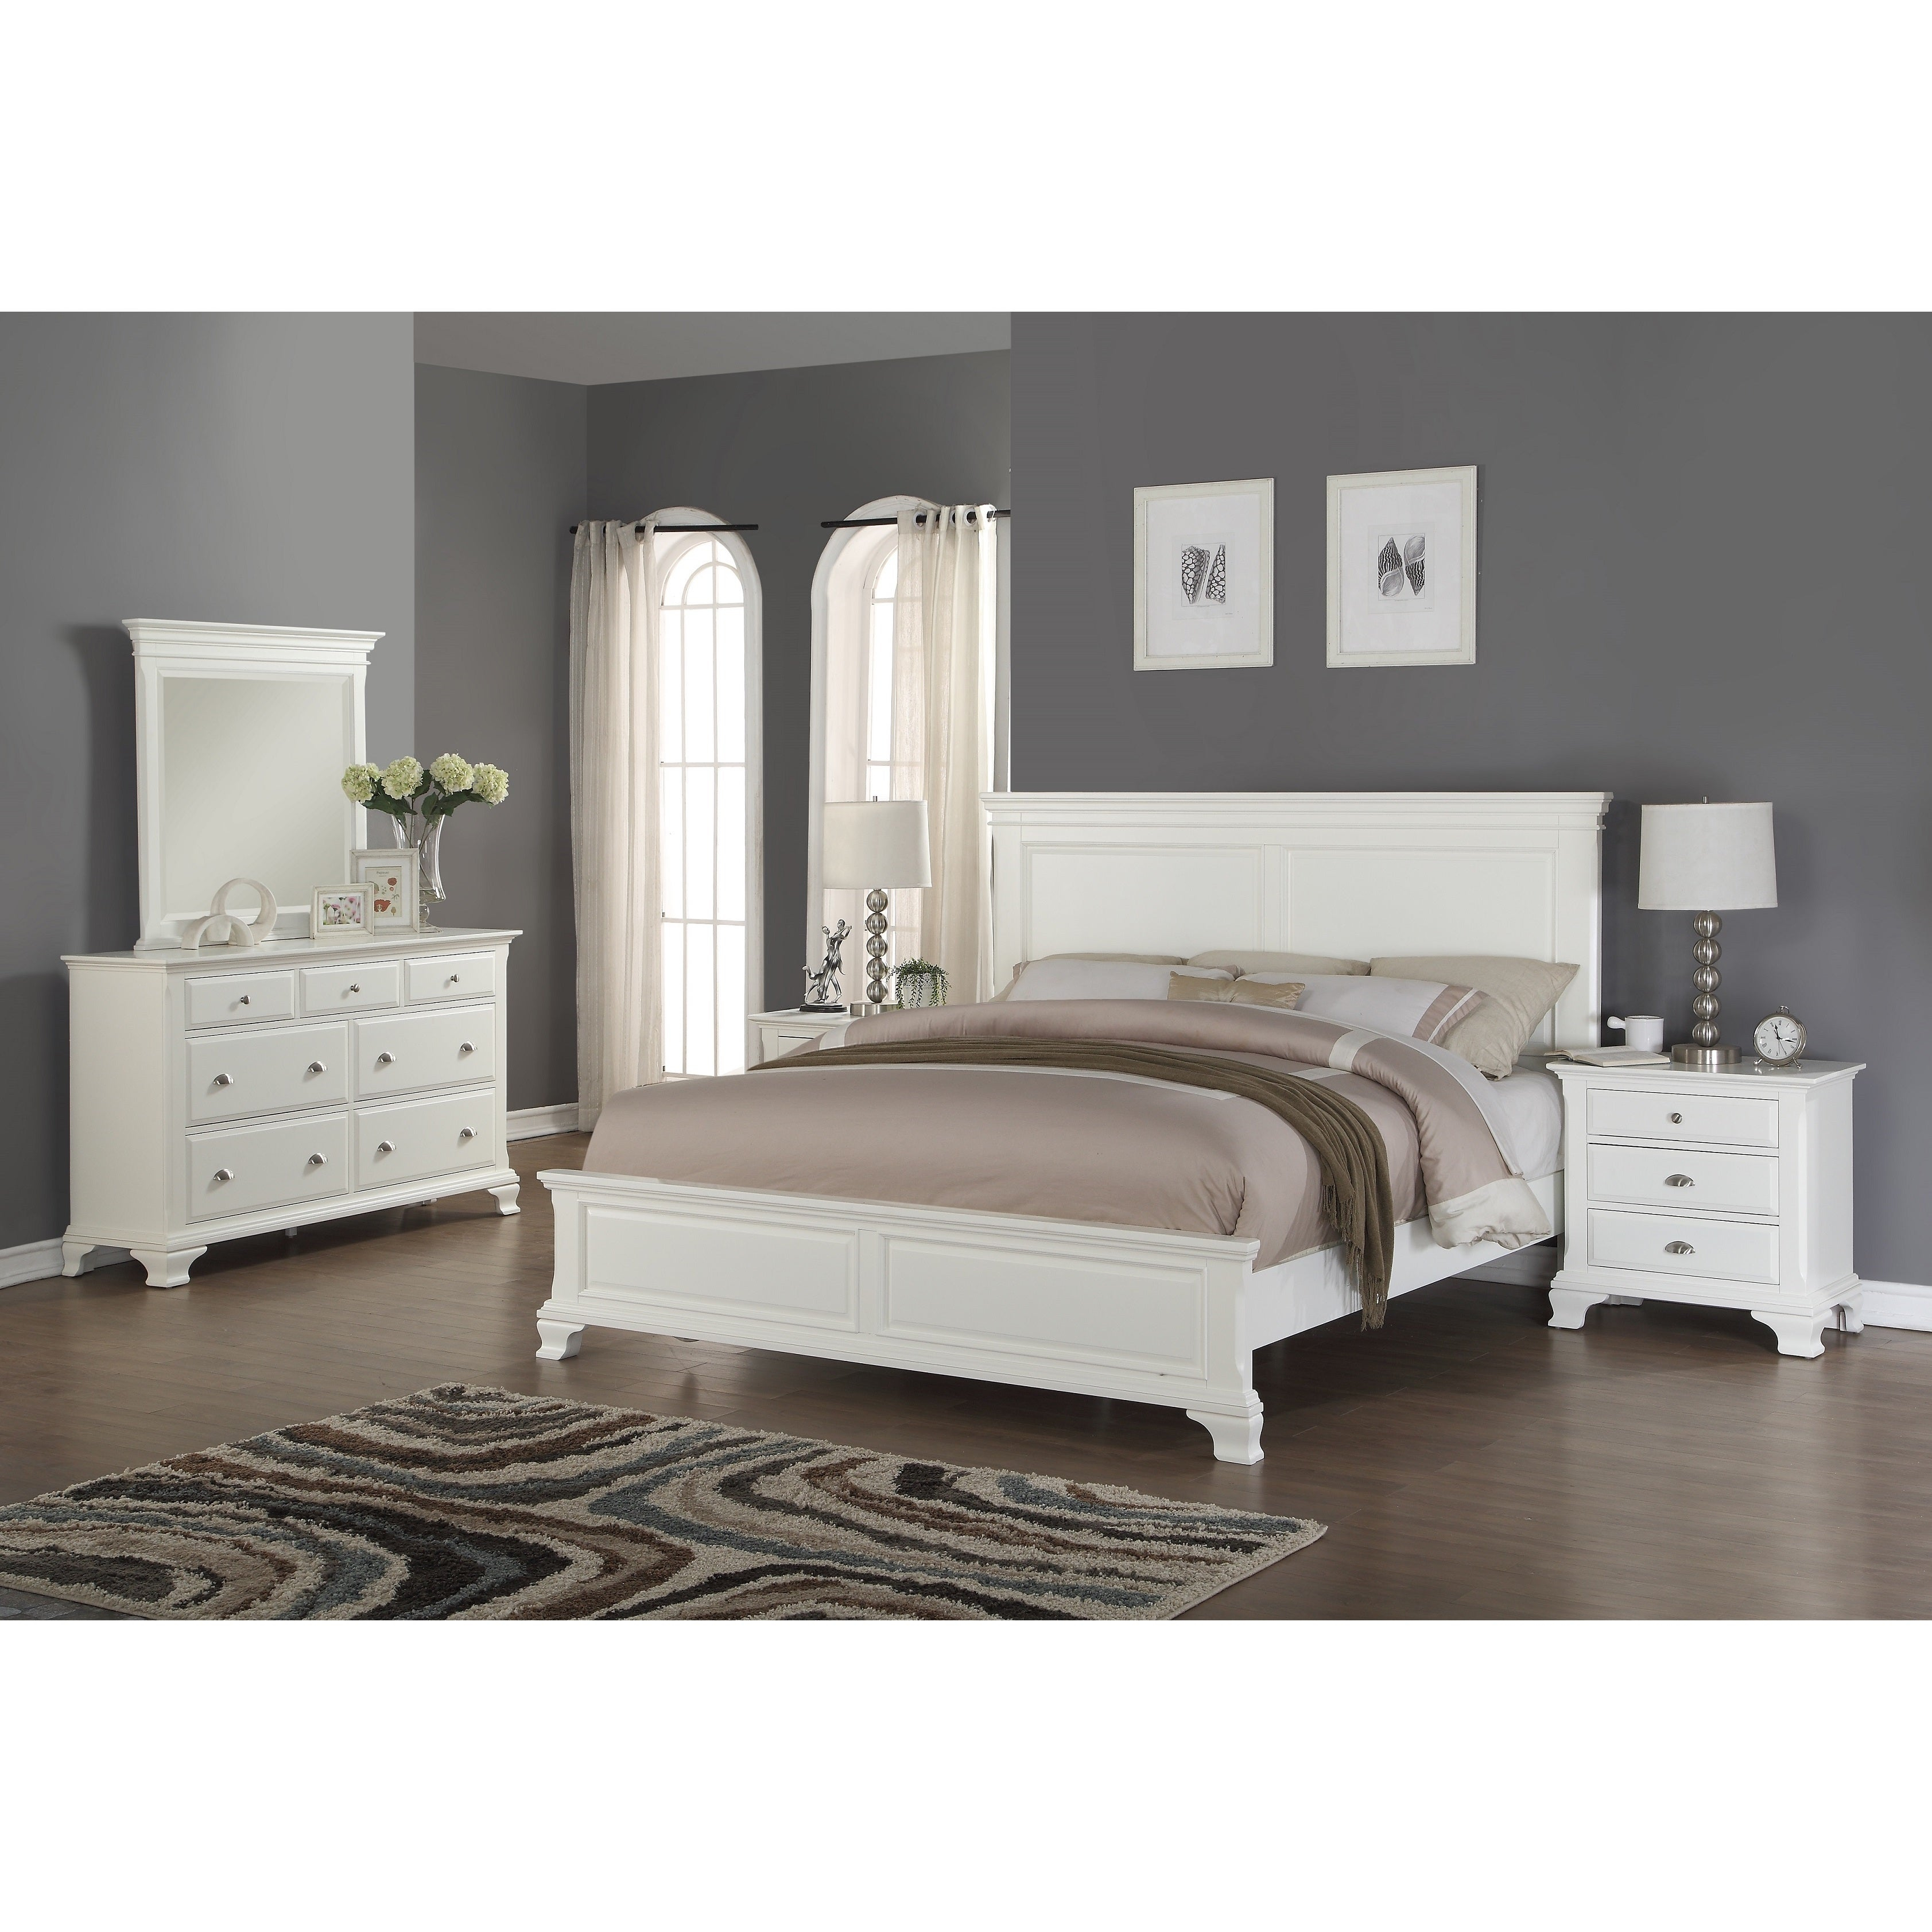 Laveno 012 White Wood Bedroom Furniture Set Includes Queen Bed Dresser Mirror And 2 Night Stands intended for proportions 3366 X 3366